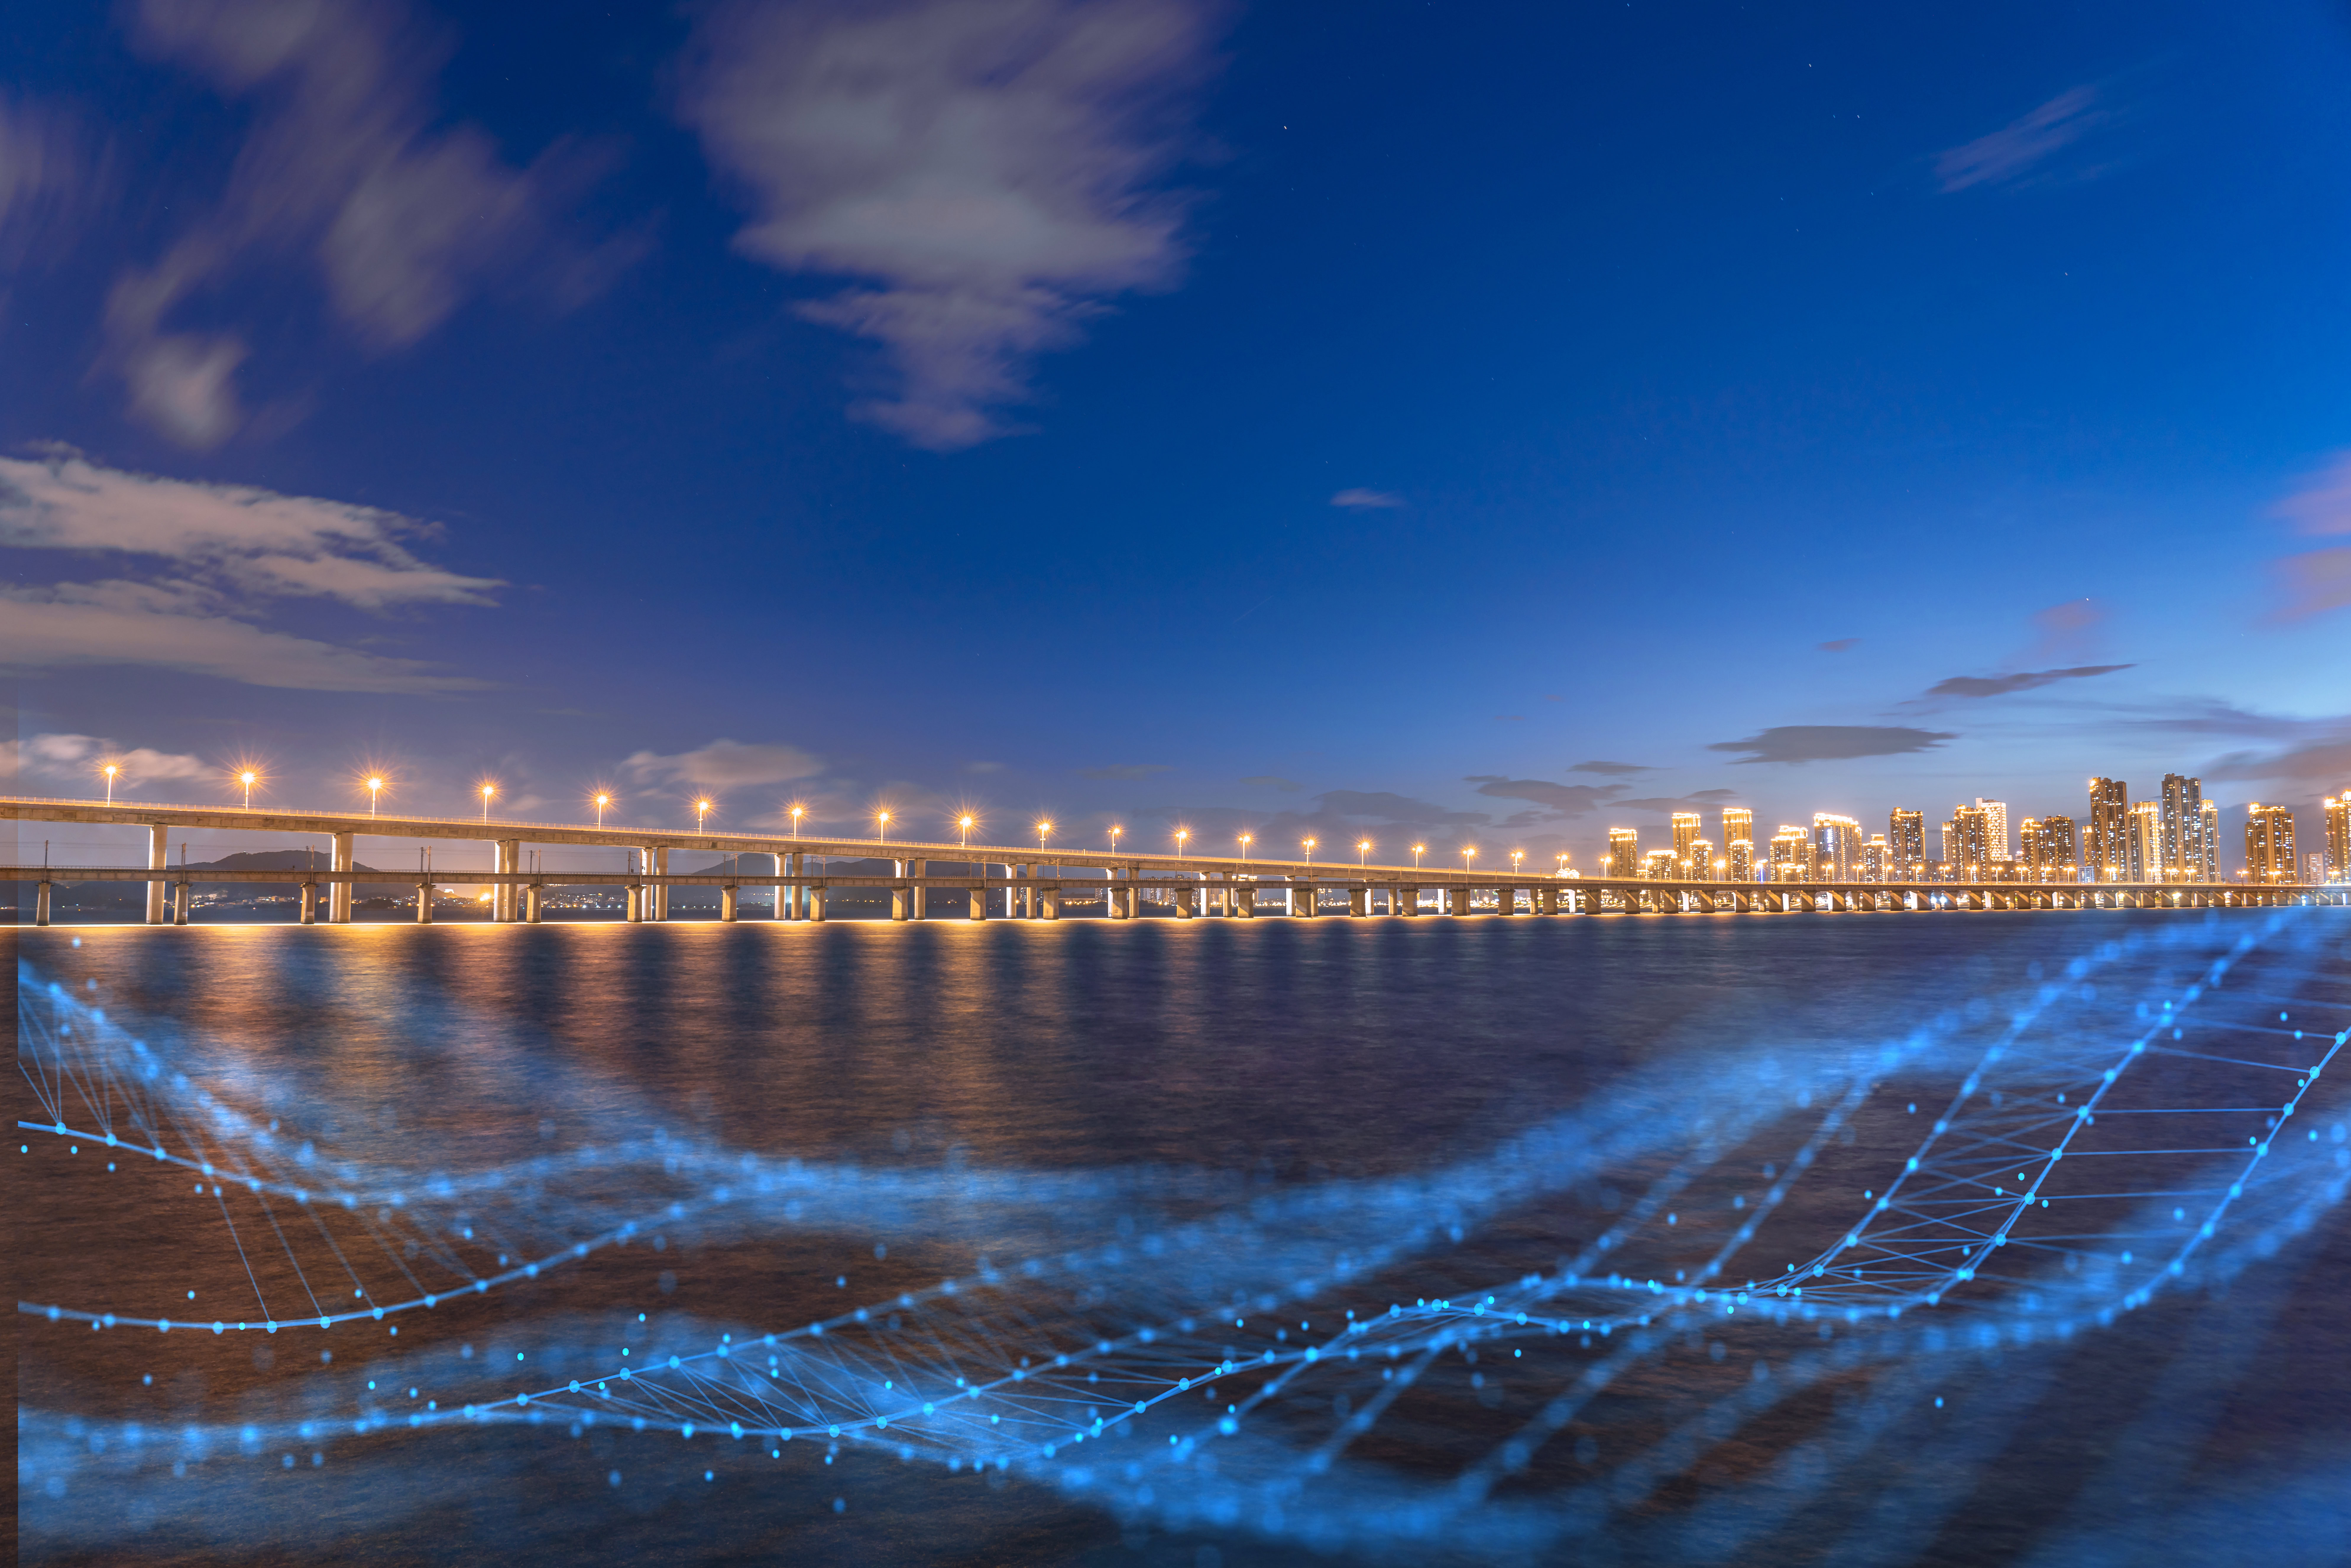 A lit bridge stretches across a body of water at dusk with a city skyline in the background. Blue digital lines and dots overlay the image, suggesting data or Auto Draft connectivity.